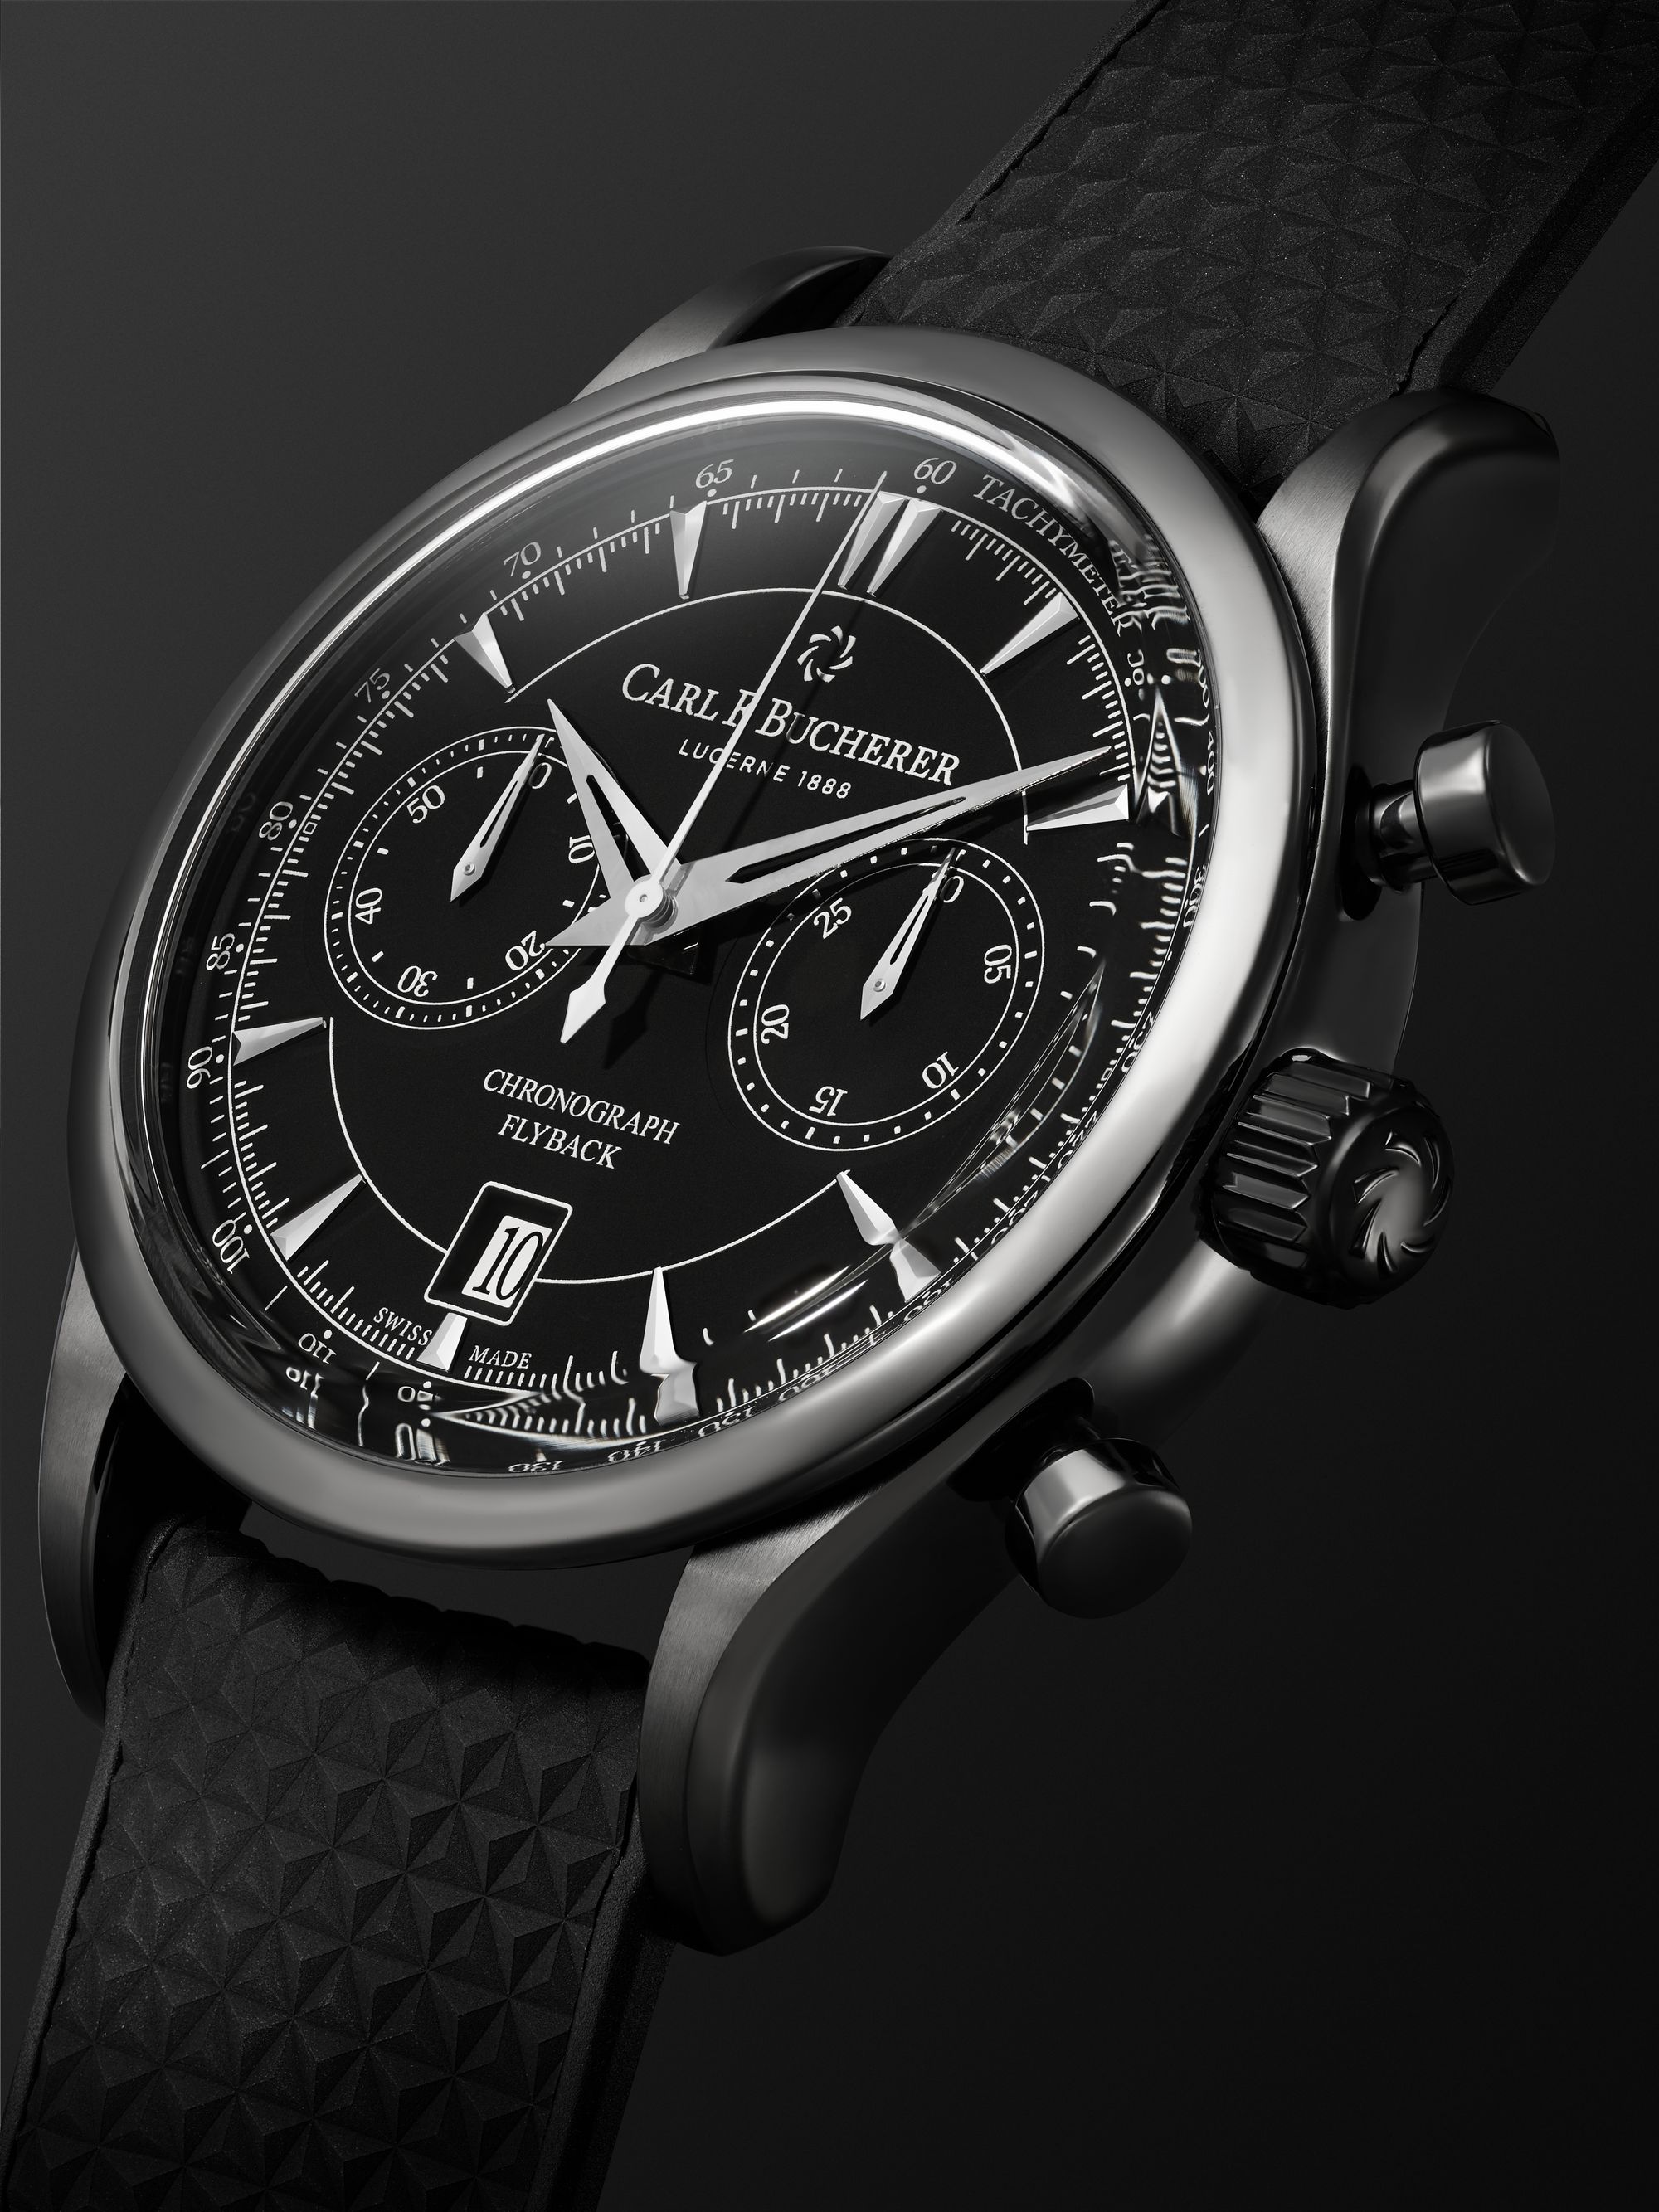 CARL F. BUCHERER Manero Automatic Flyback Chronograph 43mm Steel and Rubber Watch, Ref. No. 00.10919.12.33.01